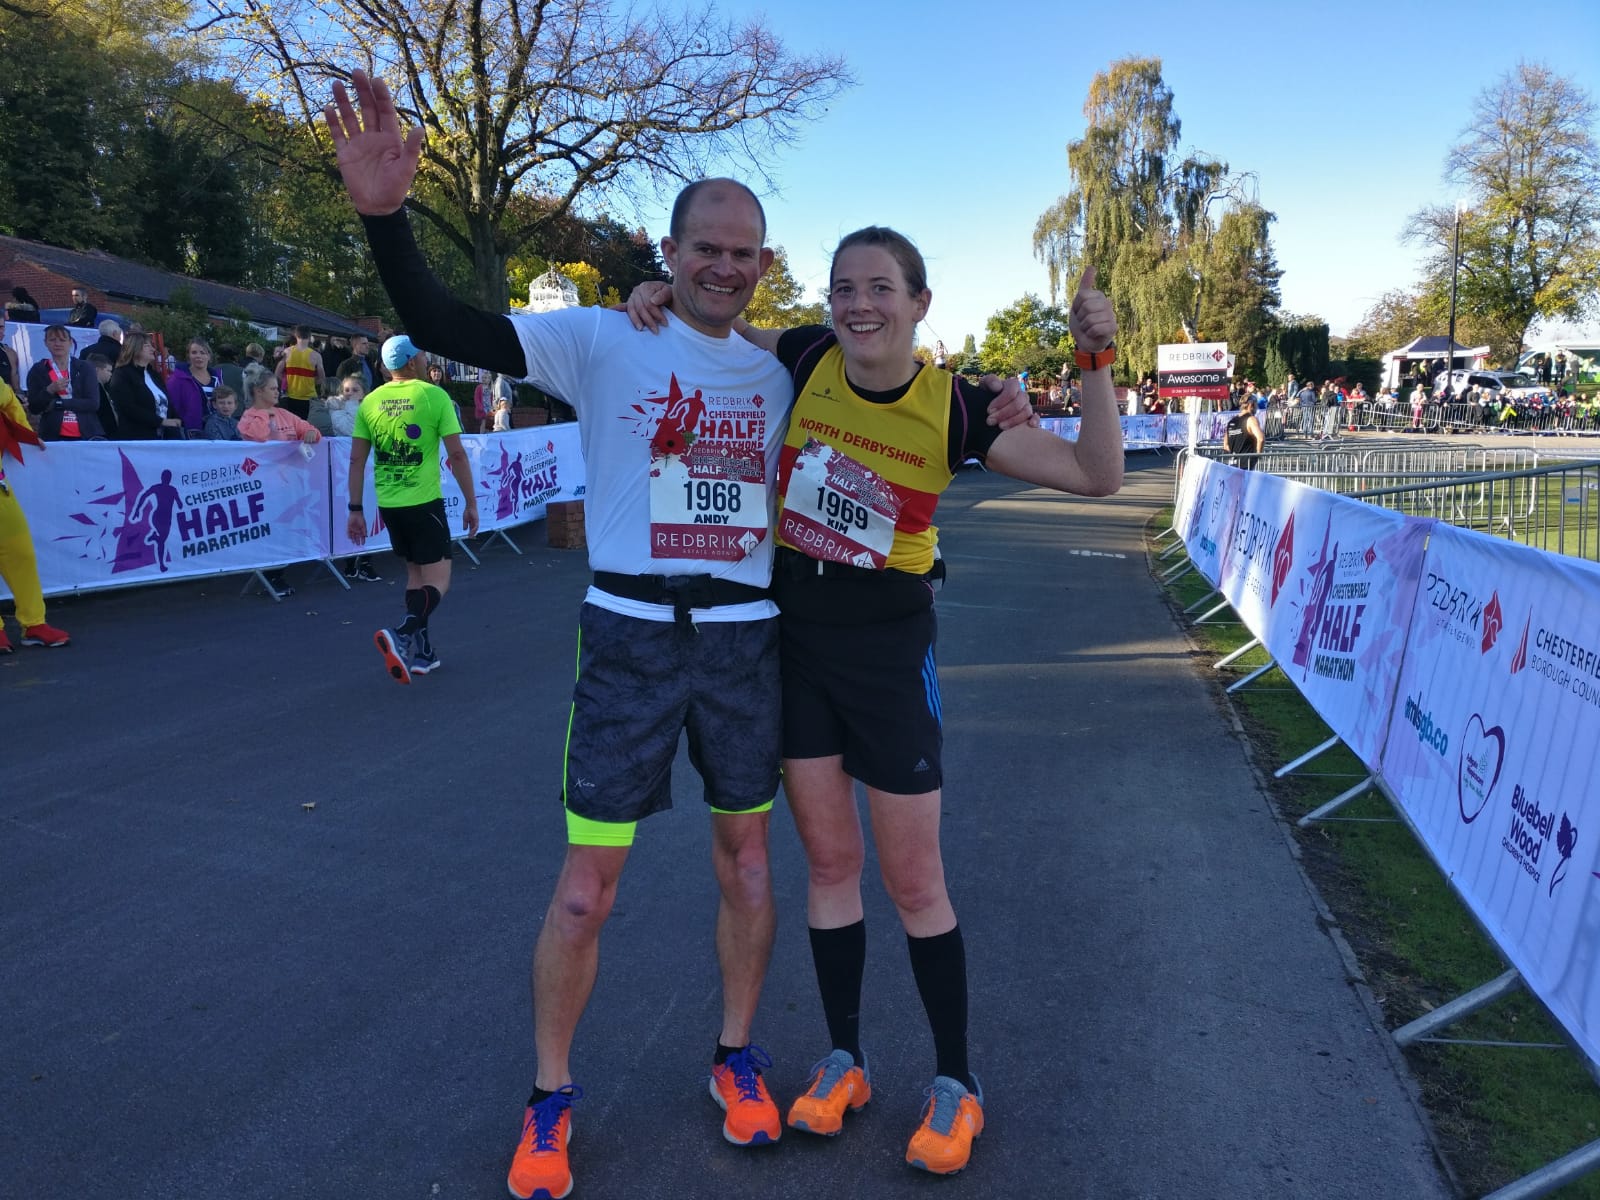 Andy and Kim are preparing to run the London Marathon for the Animal Care Trust